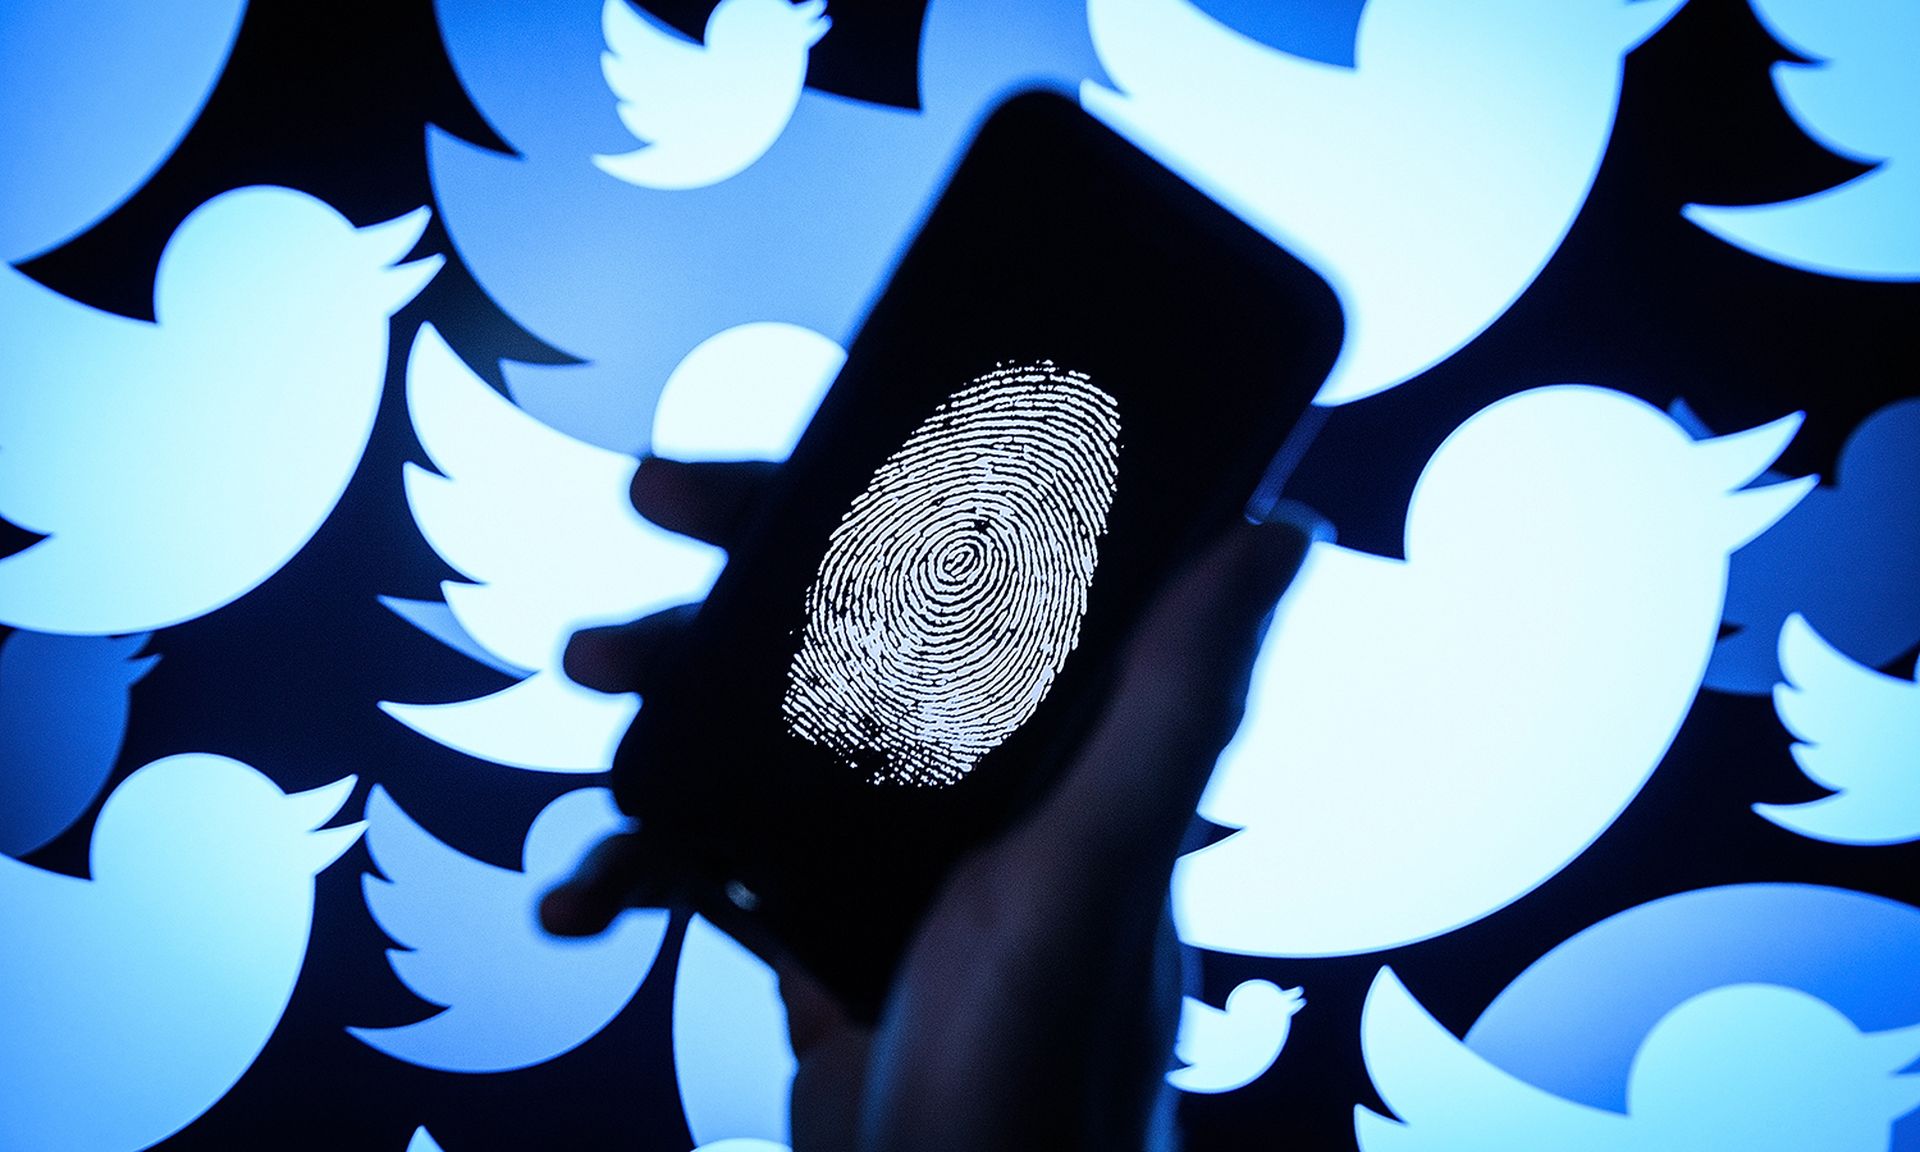 A thumbprint is displayed on a mobile phone as the logo for the Twitter social media network is projected onto a screen.